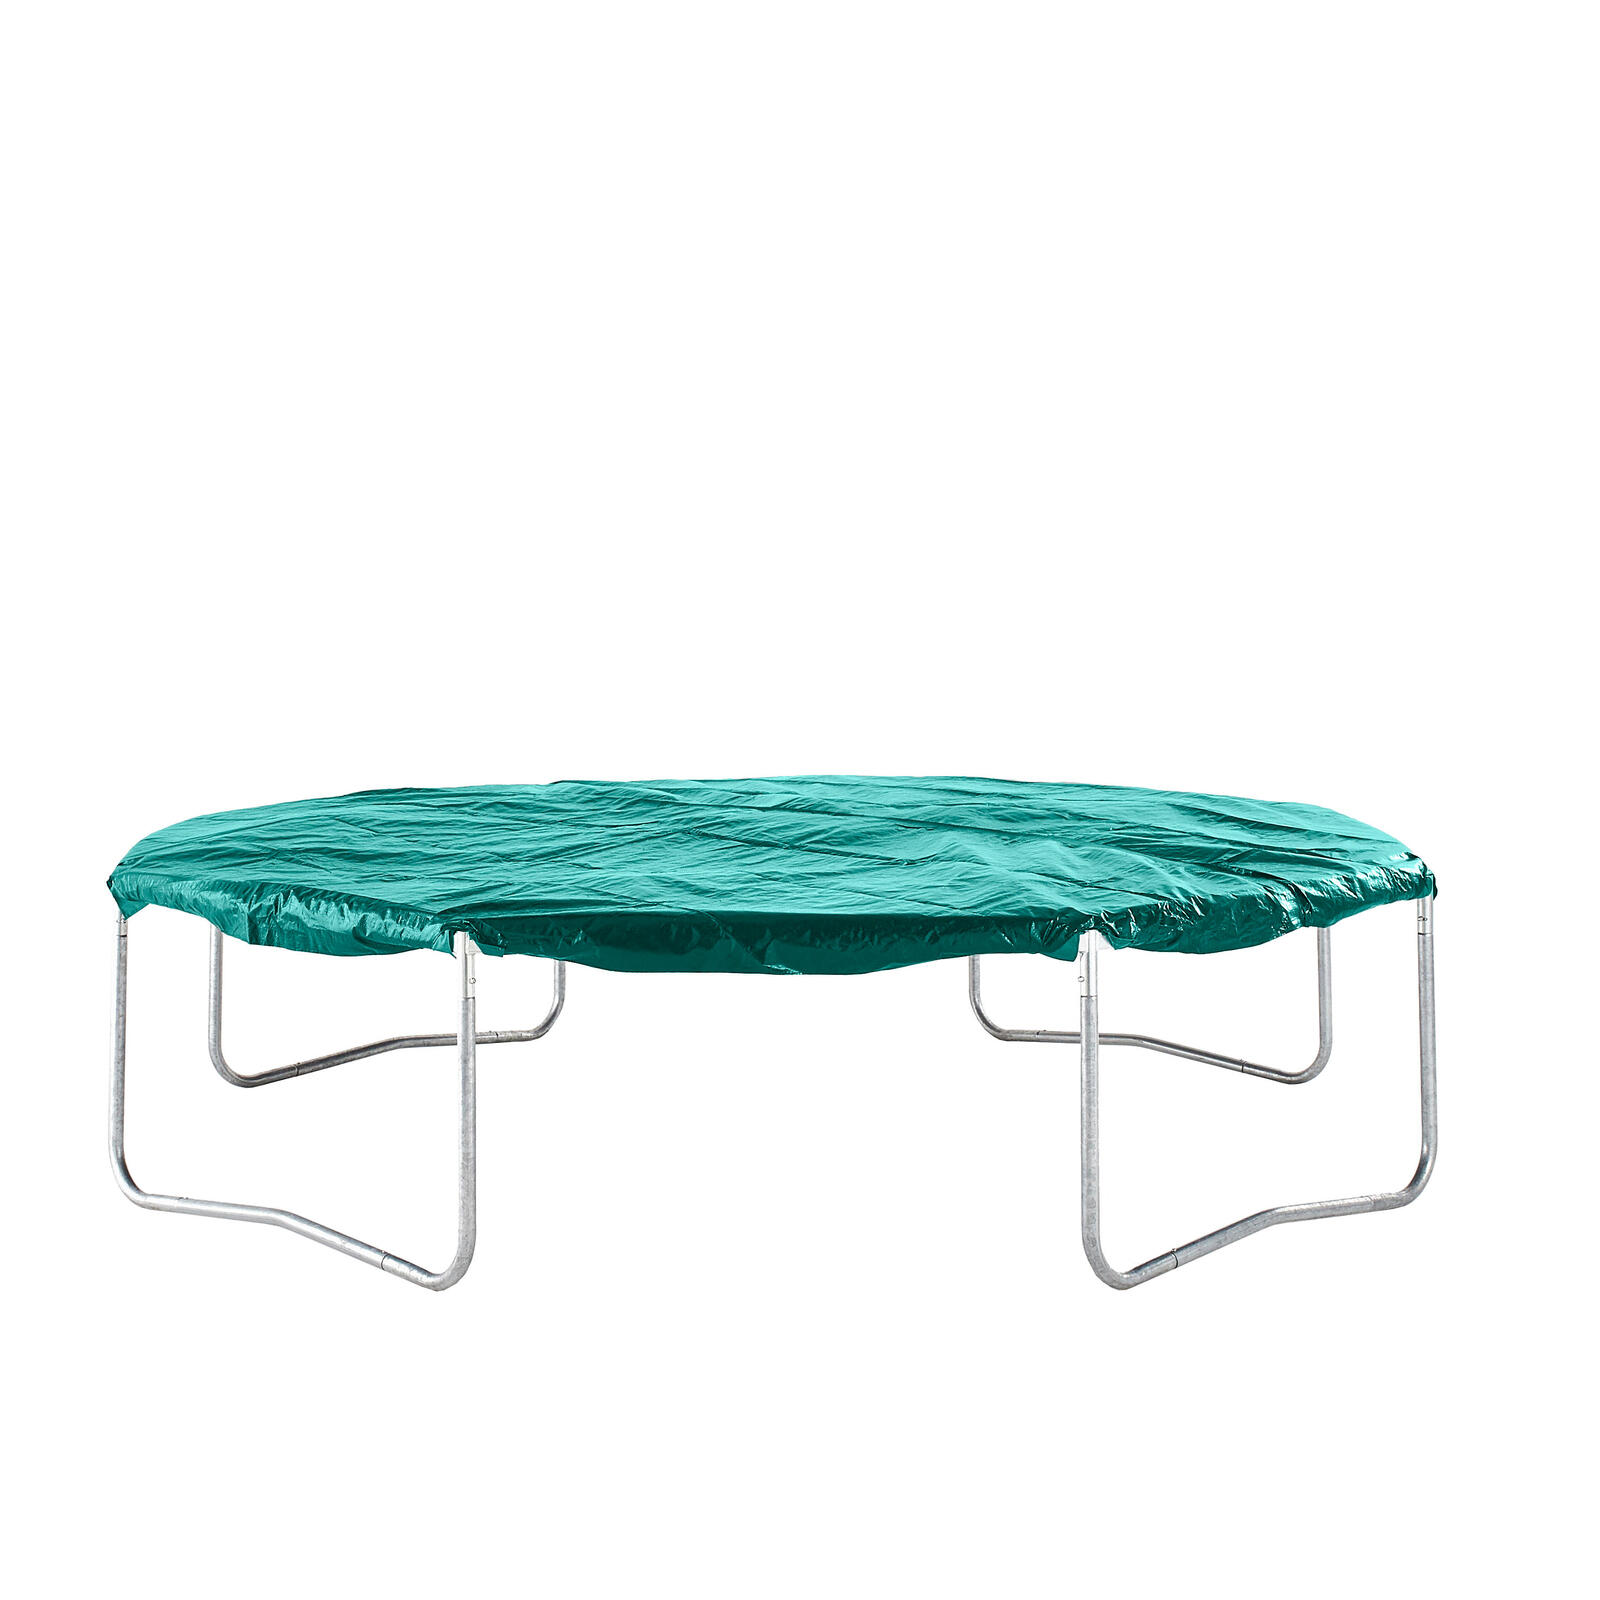 Trampoline cover octagonal 300